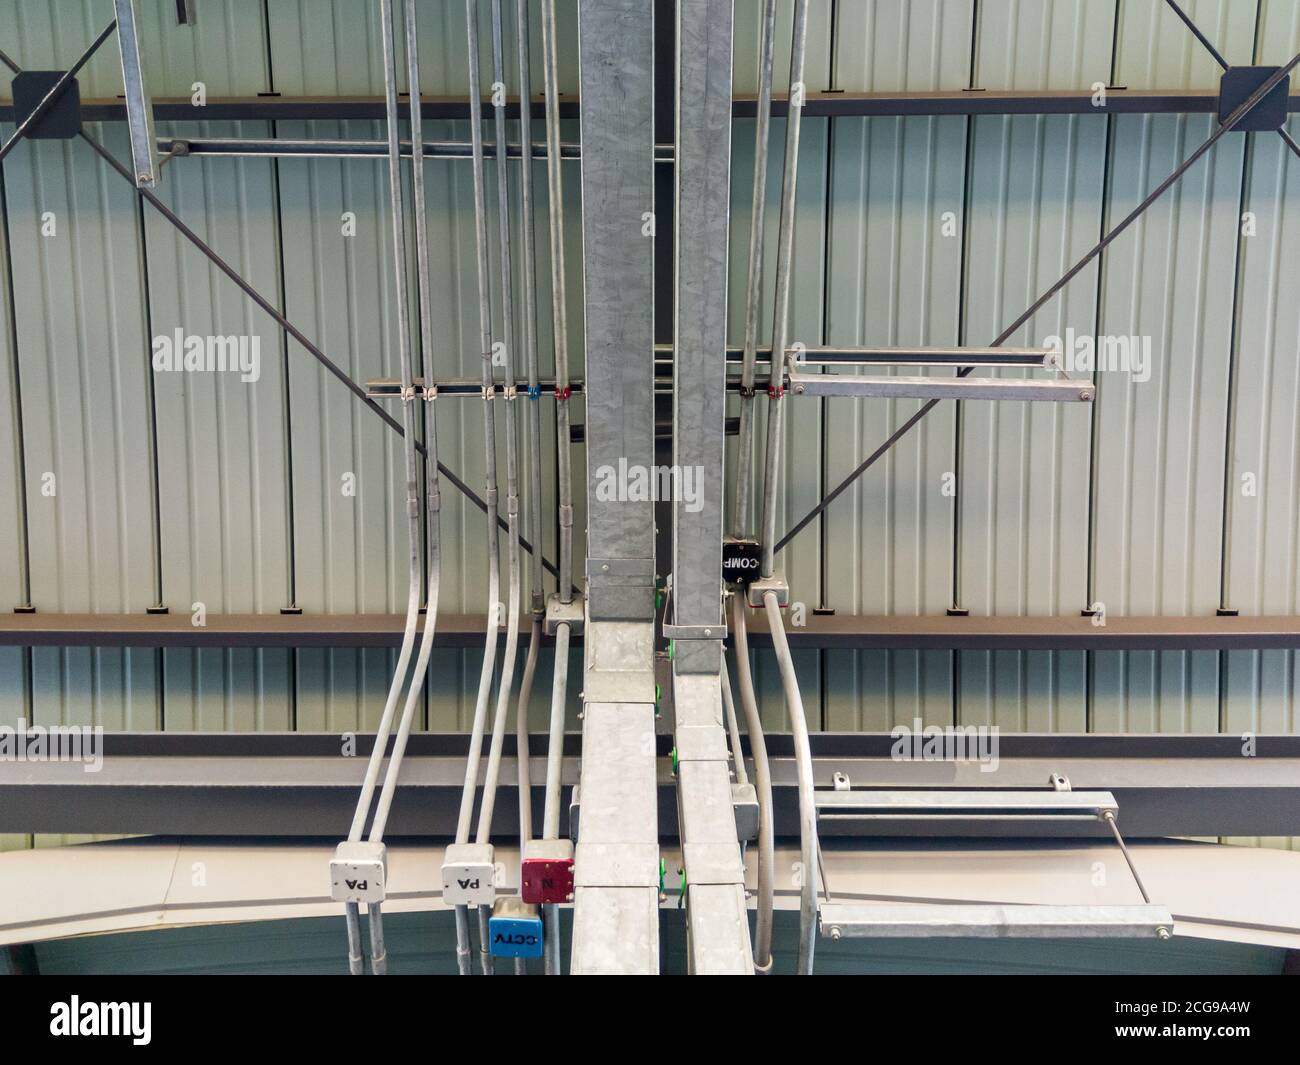 https://c8.alamy.com/comp/2CG9A4W/metal-pipe-row-and-metal-tray-of-the-electric-system-on-the-ceiling-of-the-urban-train-station-under-construction-2CG9A4W.jpg